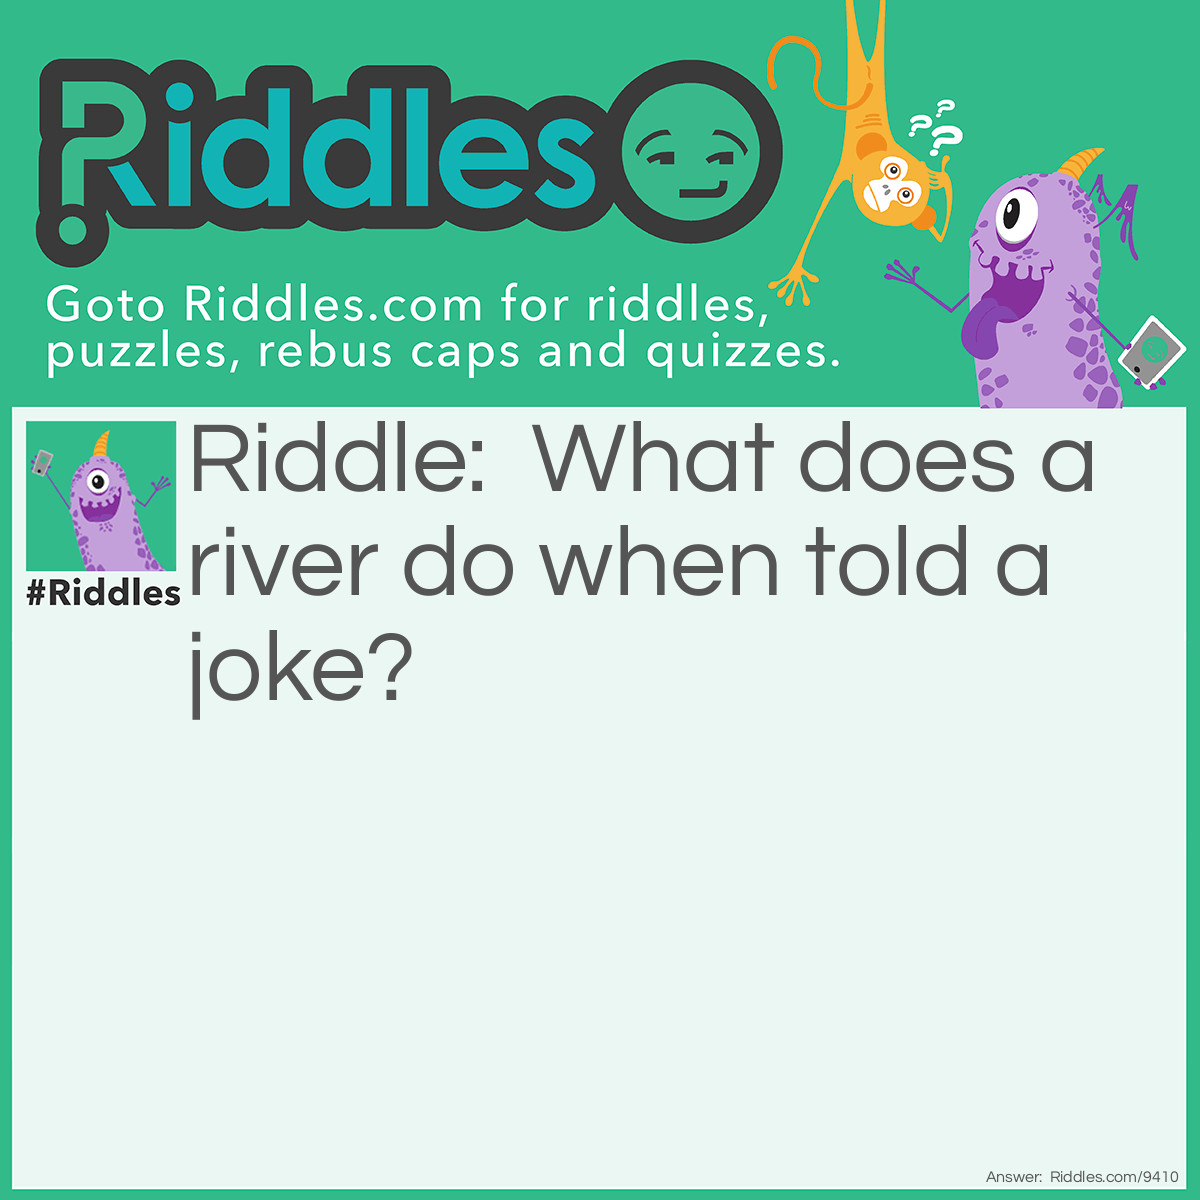 Riddle: What does a river do when told a joke? Answer: It "gushes" with laugher.